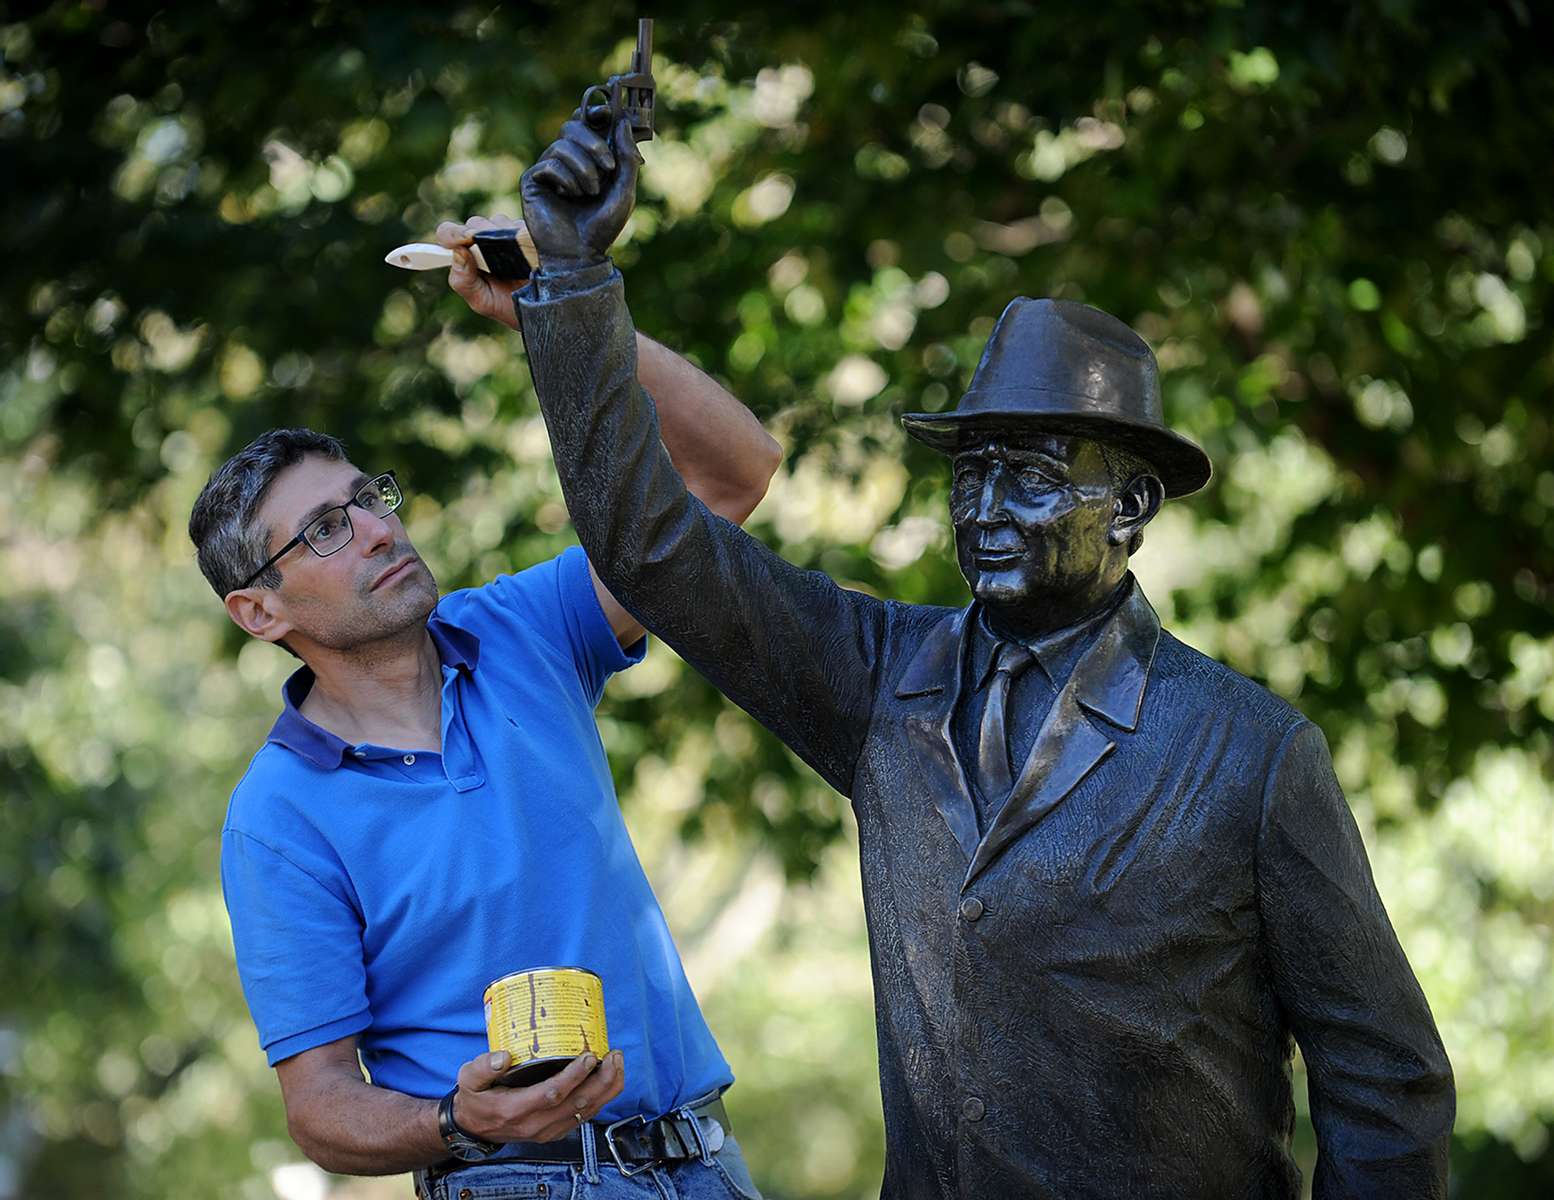 Hopkinton sculptor Michael Alfano applies wax to his sculpture, “The Starter,” honoring George V. Brown, Hopkinton’s “first citizen of sport,” October 6, 2021,  at the starting line of the Boston Marathon.  Alfano, who has also run the Marathon, spruces up his 2008 sculpture in advance of each race.  The 125th running of the Boston Marathon is Monday, October 11, 2021.